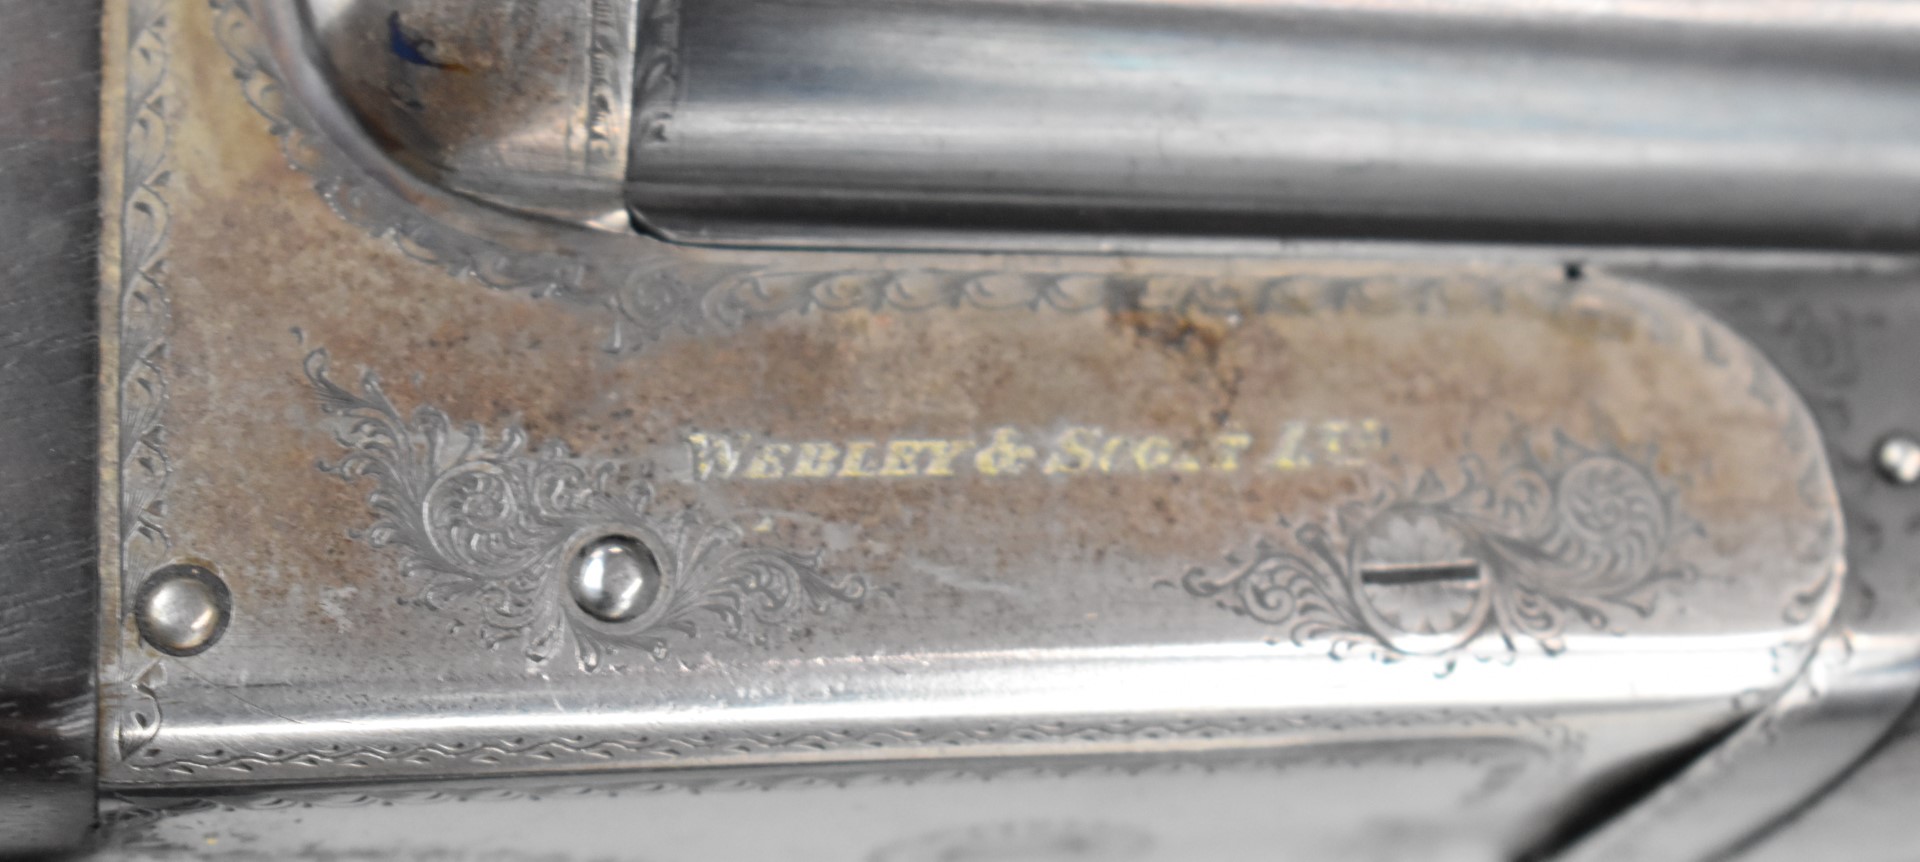 Webley & Scott 12 bore side by side ejector shotgun with named and engraved lock, border engraved - Image 6 of 6